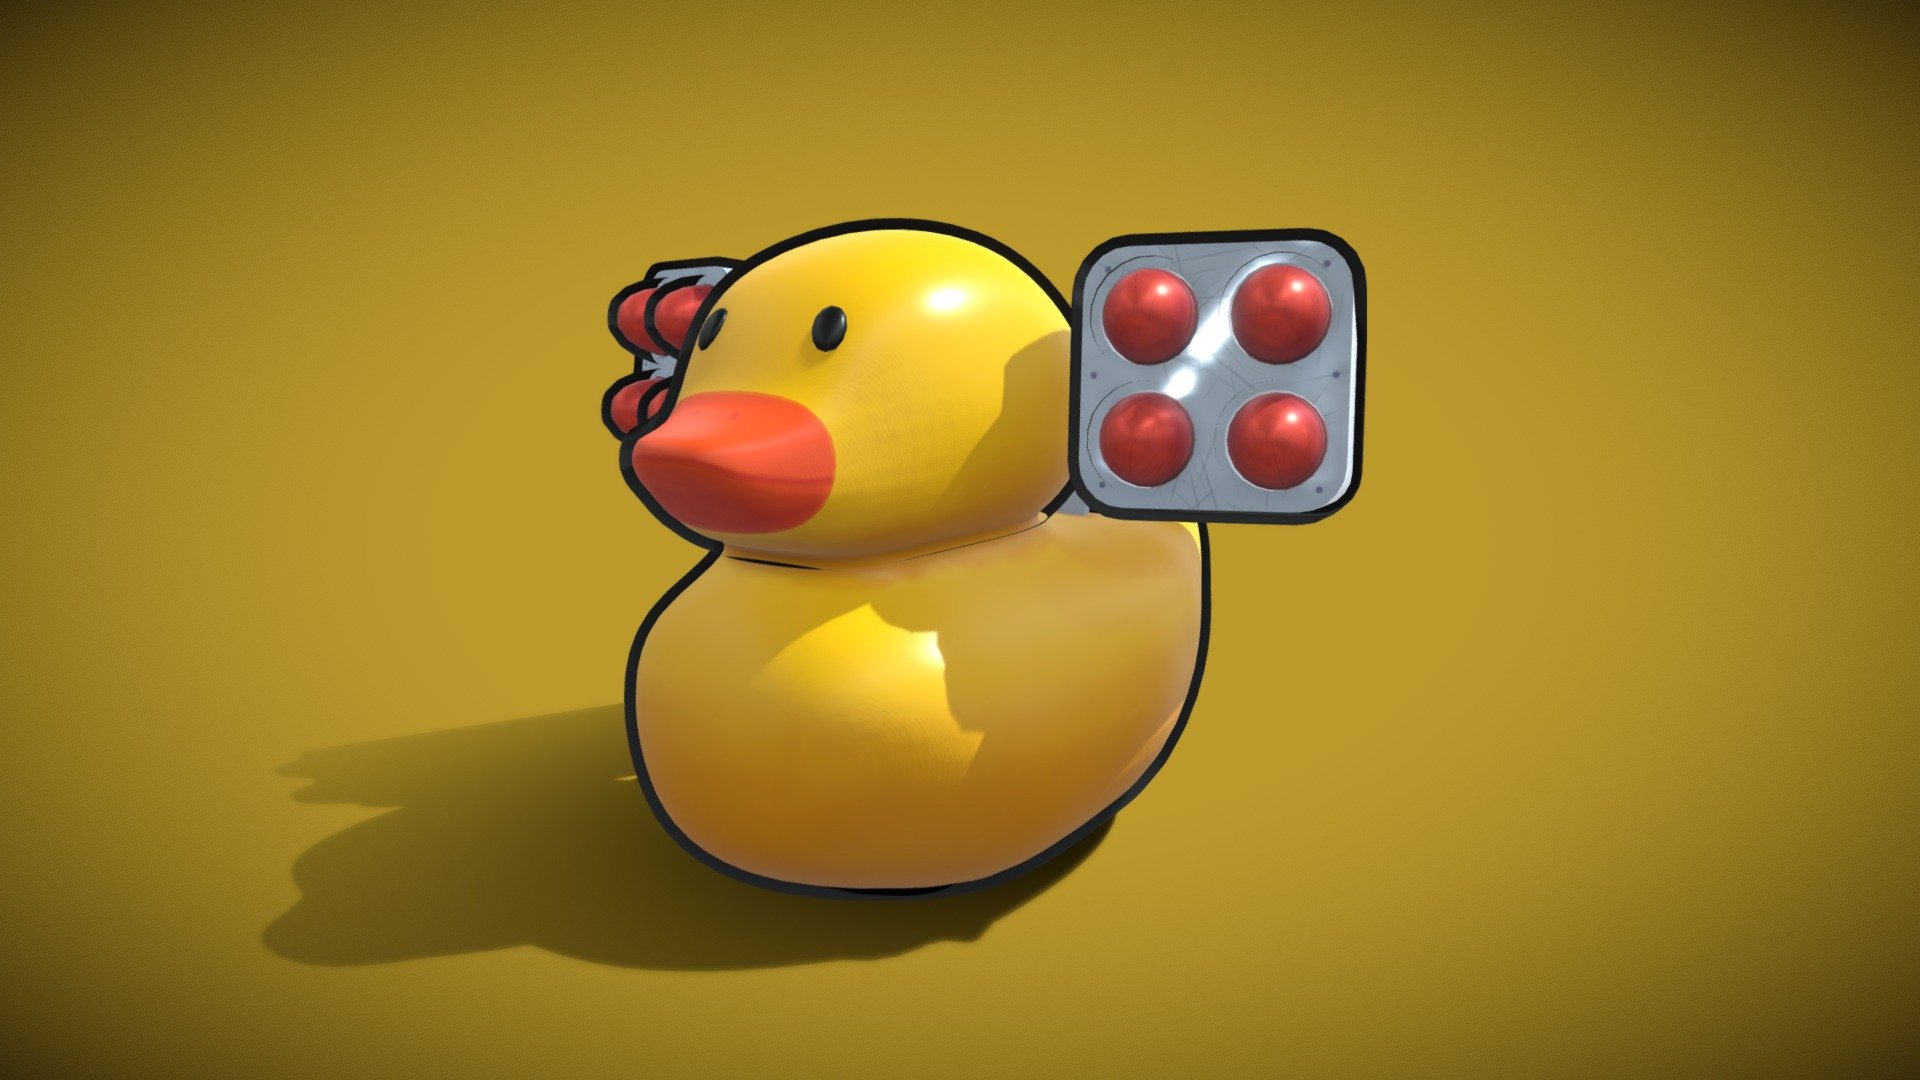 This particular rubber ducky is actually a certified baddie. It can and will destroy your house with a barrage of missiles! Beware.

It uses Painted Textures along with a pbr setup to achieve slightly more realistic material views




Model Statistics



Vertices: 8,382

Edges: 16,344

Faces: 7,992

Tris: 16,704

 - Toy Rubber Ducky With Missile Launcher - 3D model by Om.Rane 3d model